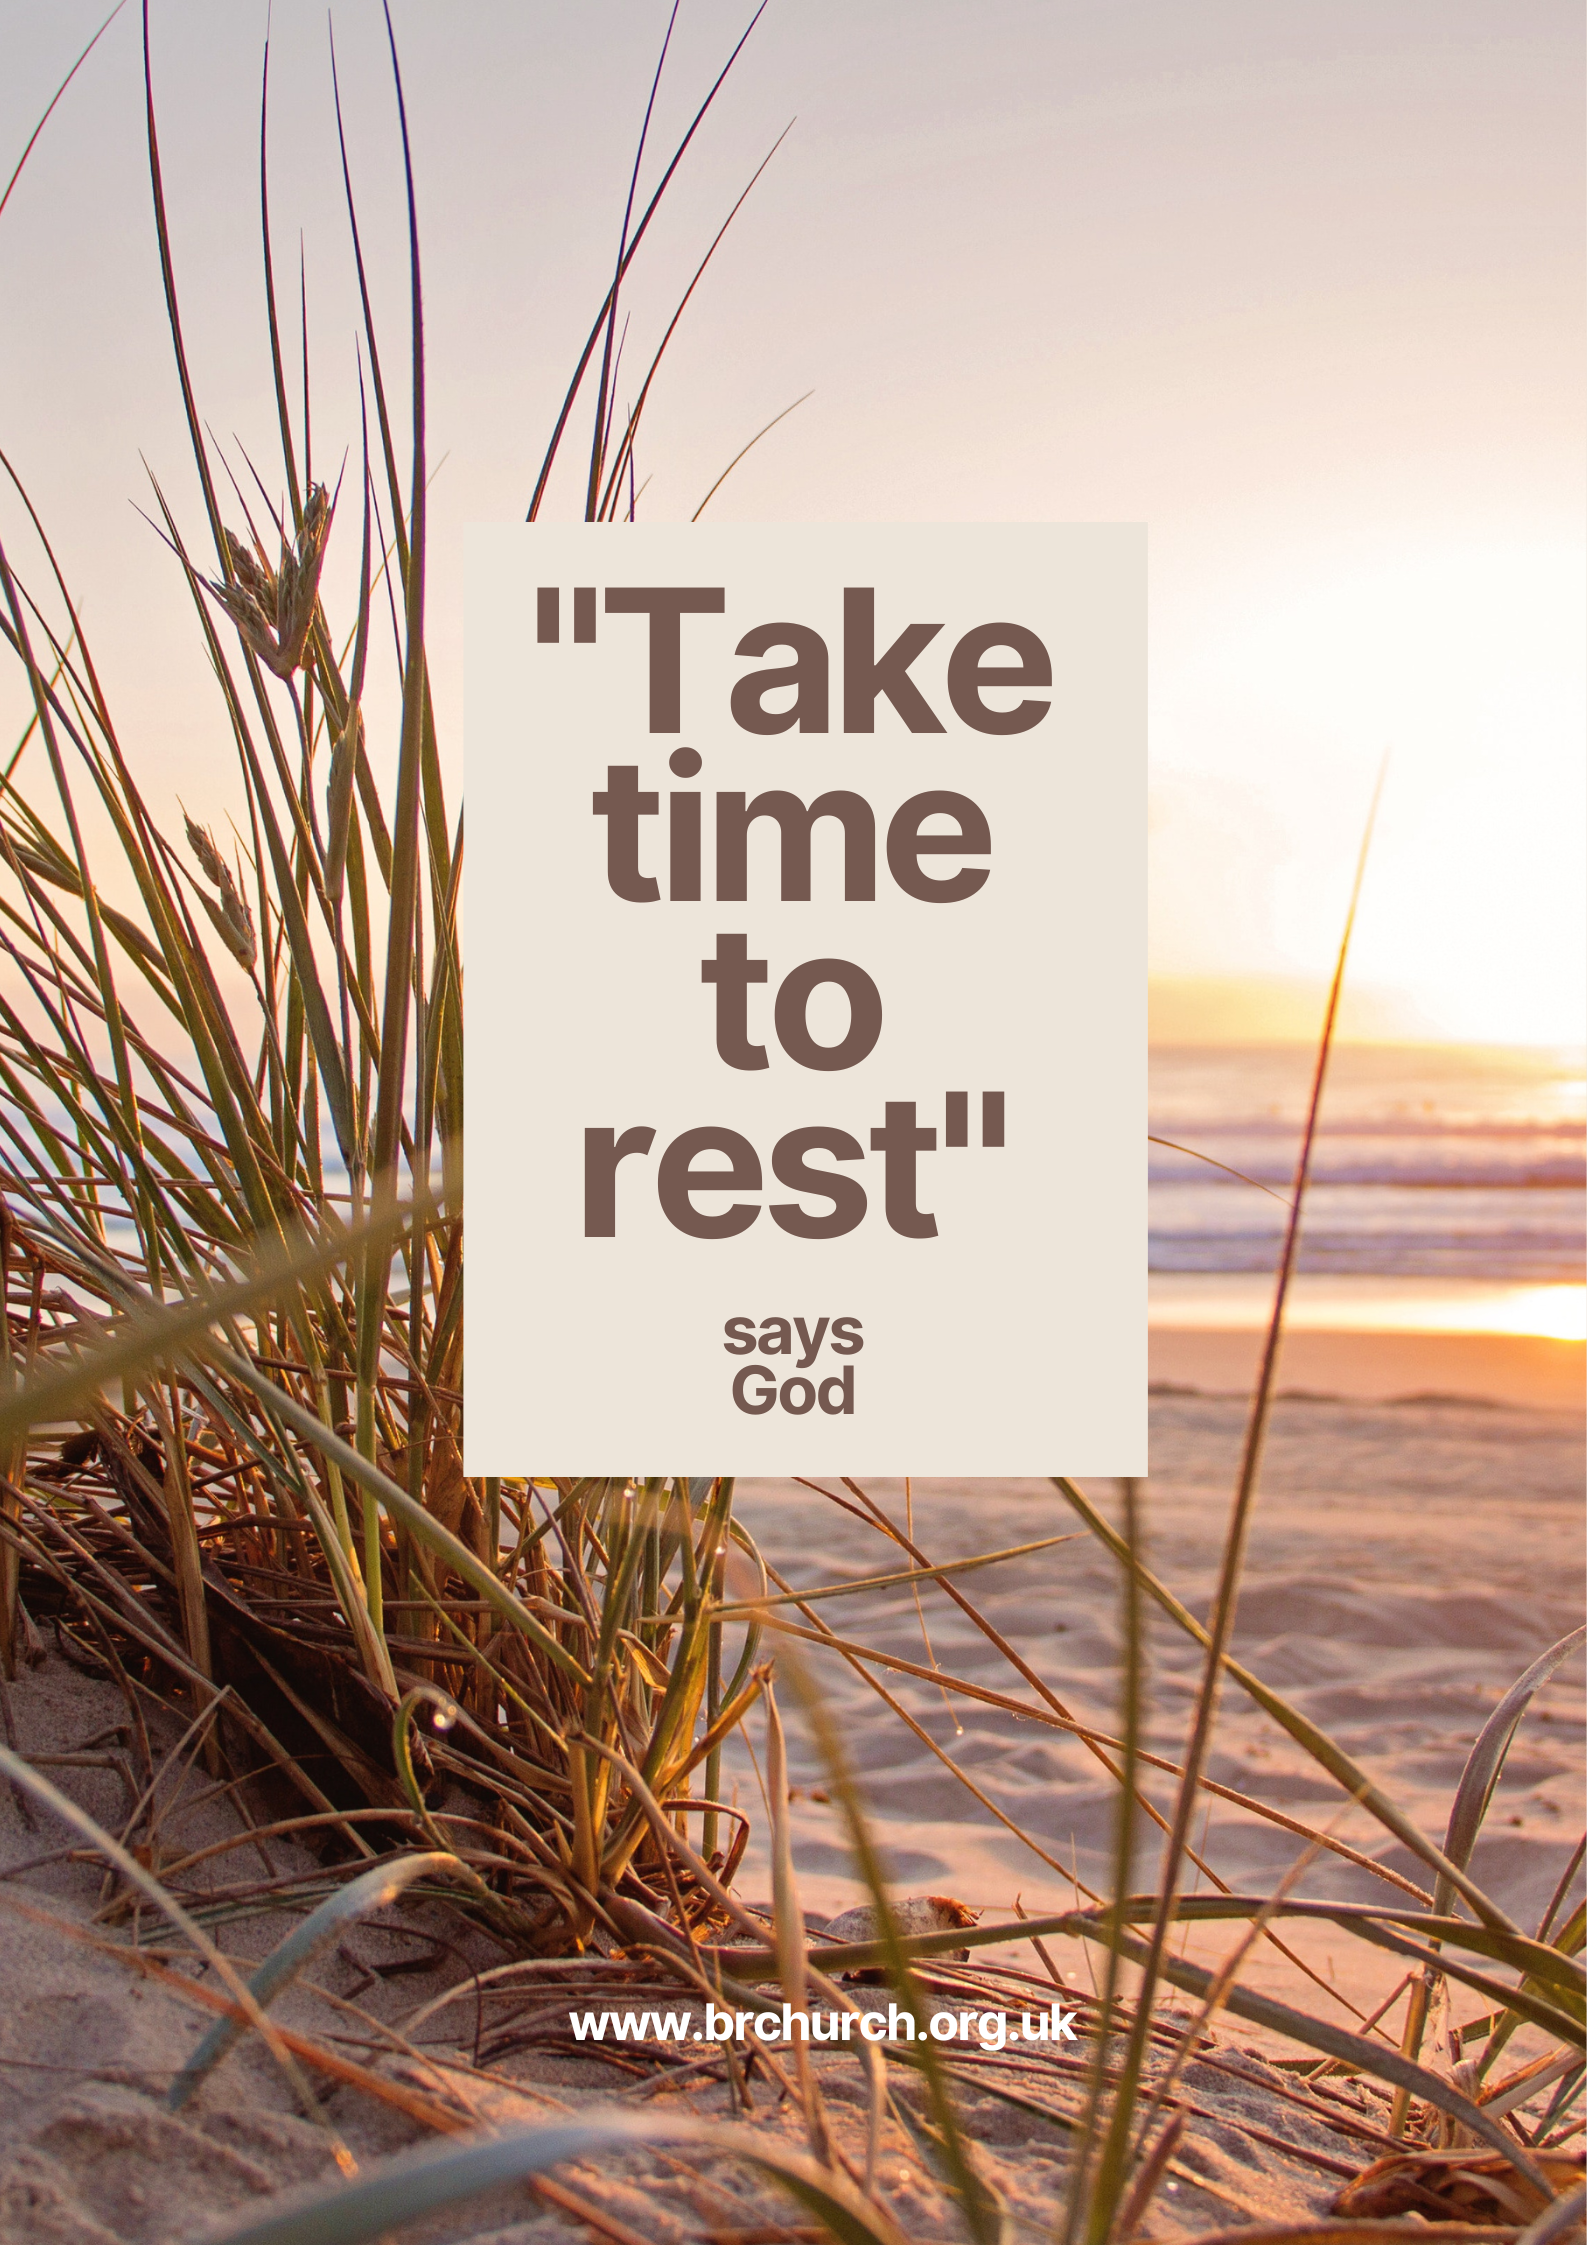 22.07.28 - Take time to rest